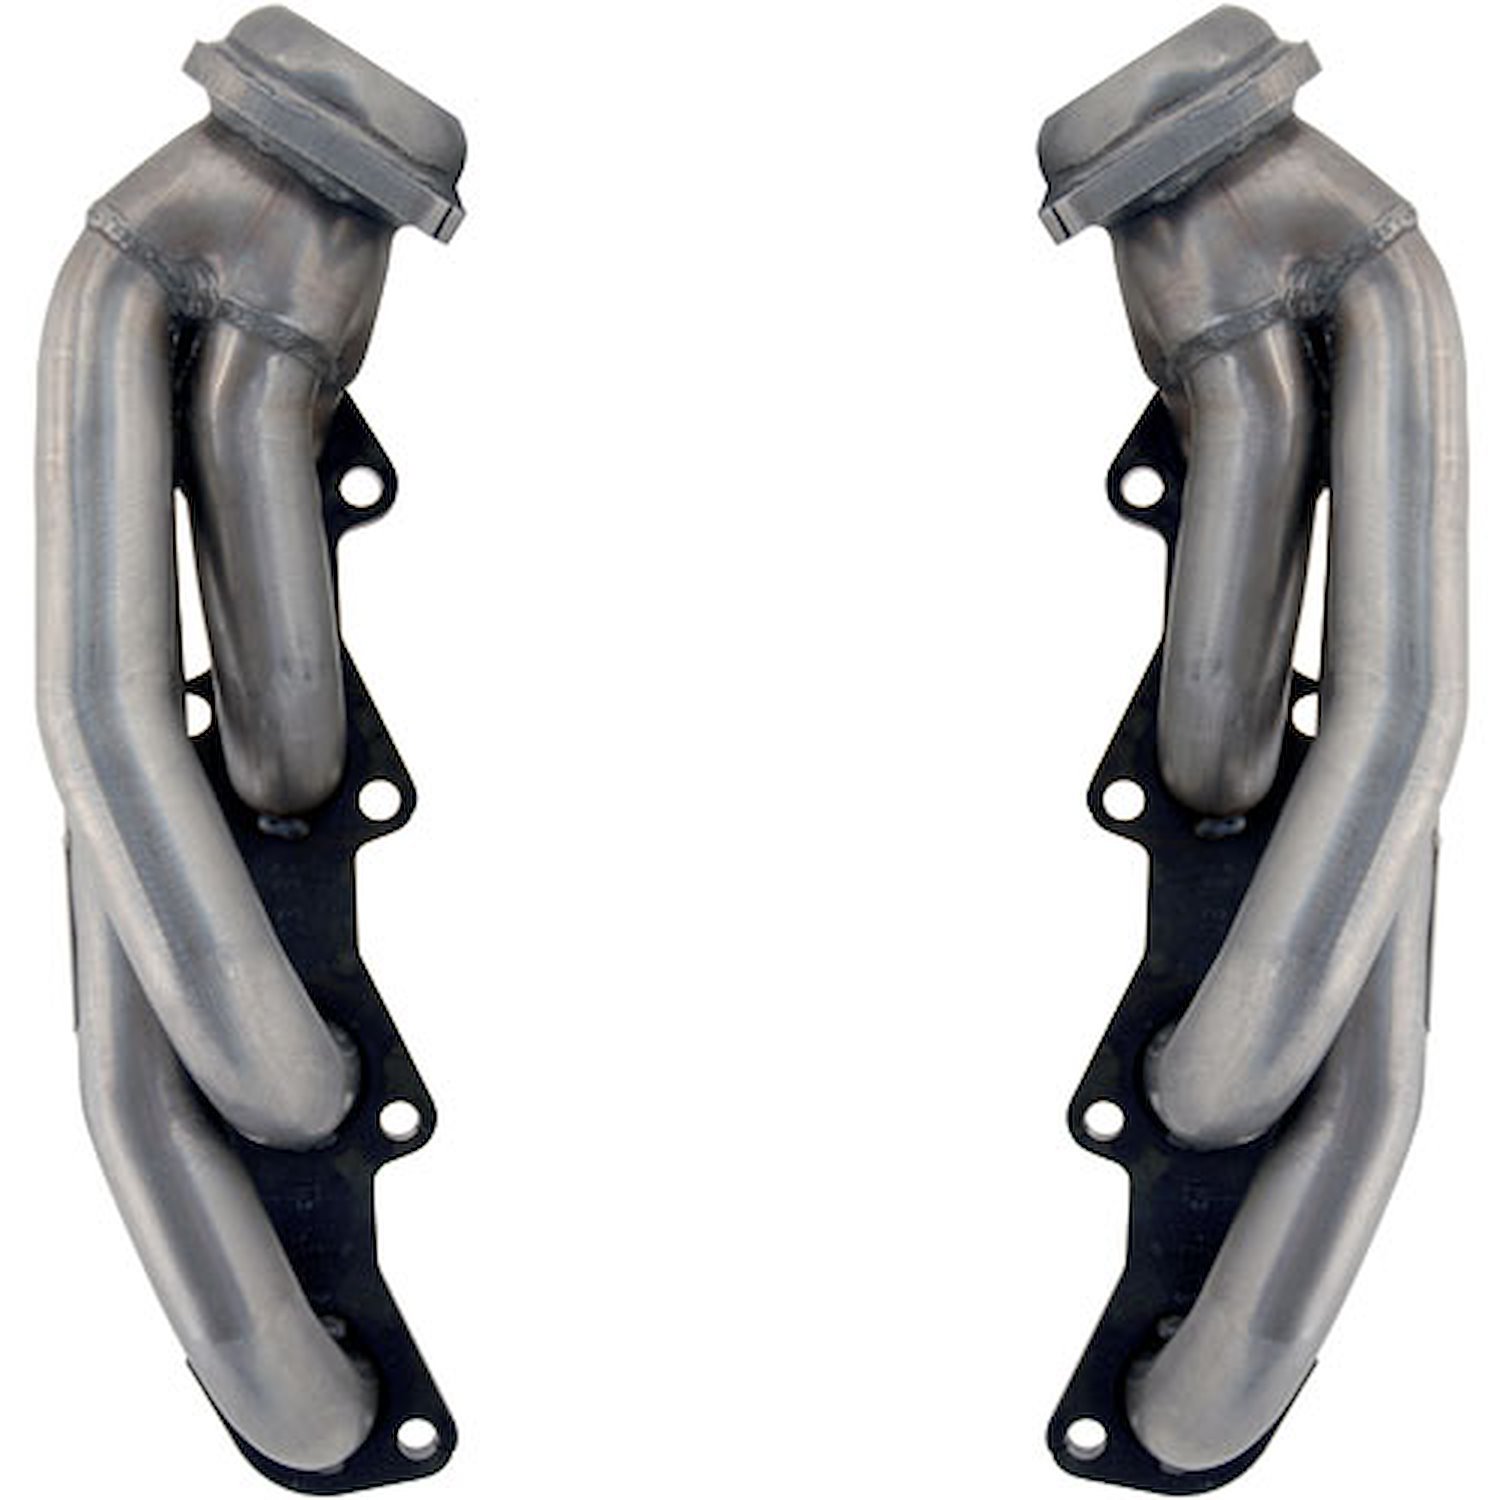 Ceramic Coated Stainless Steel Truck Headers 1999-2004 F-250/F-350 Super Duty